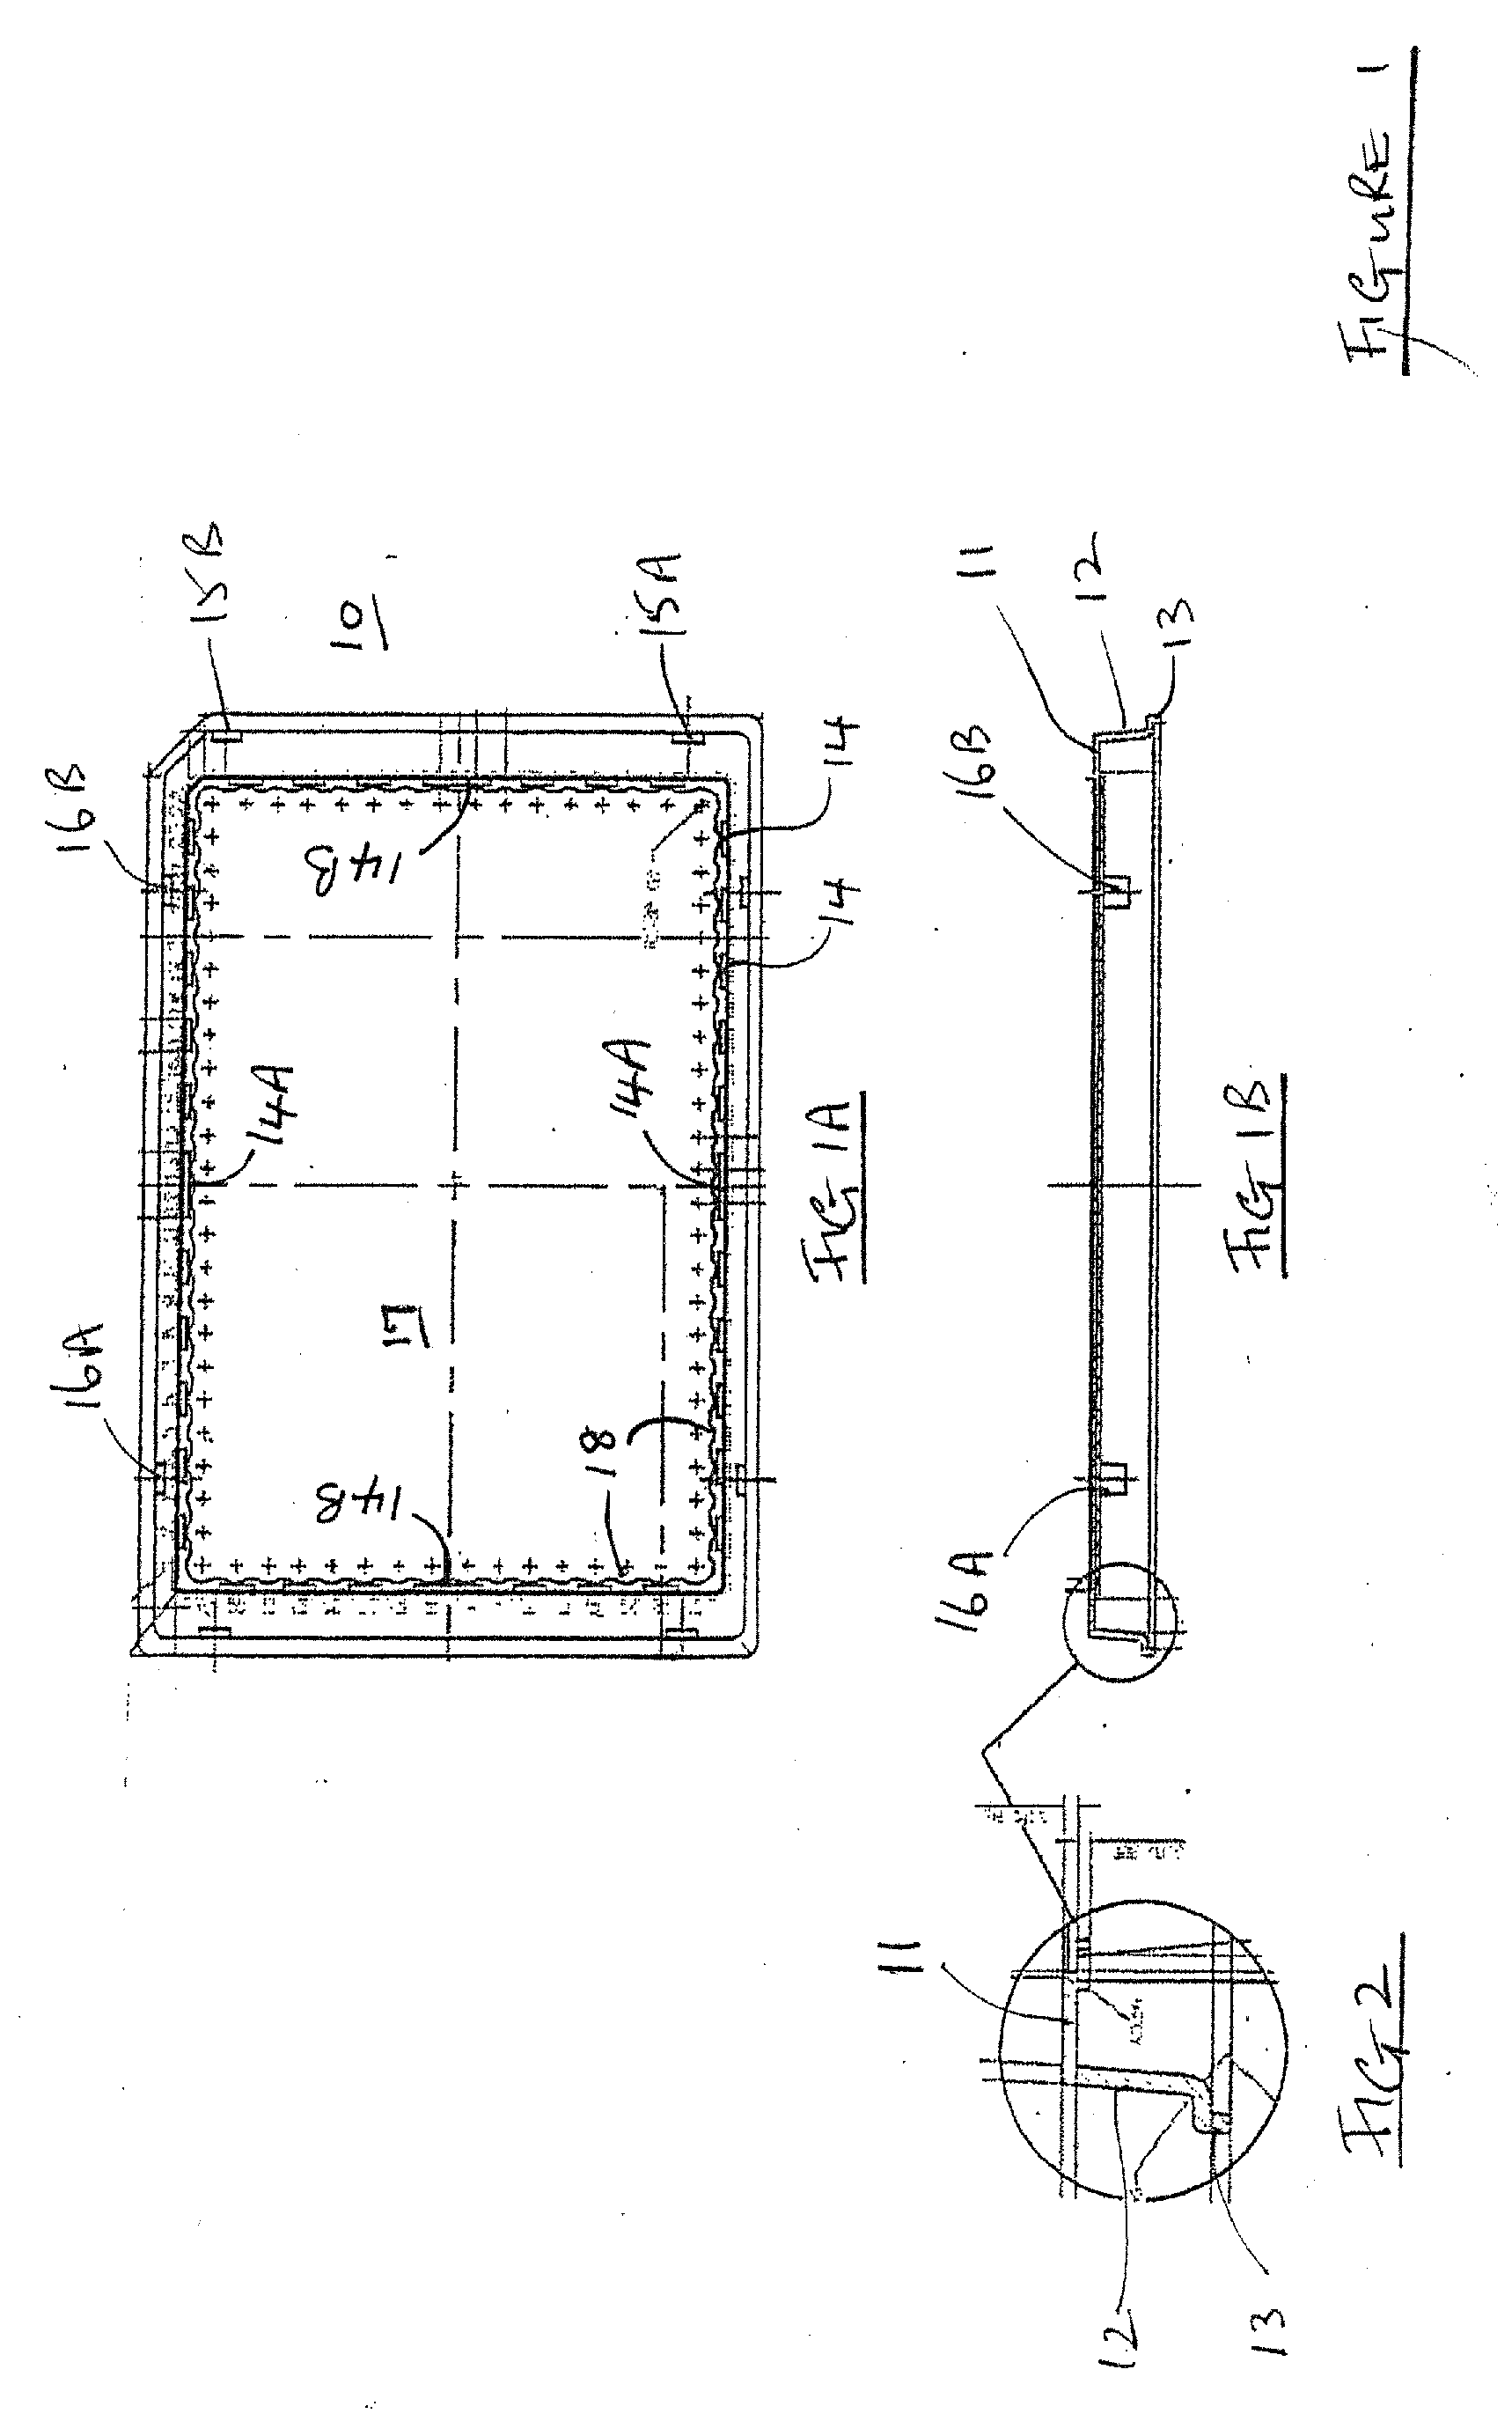 Improved two-part microwell plates and methods of fabricating same